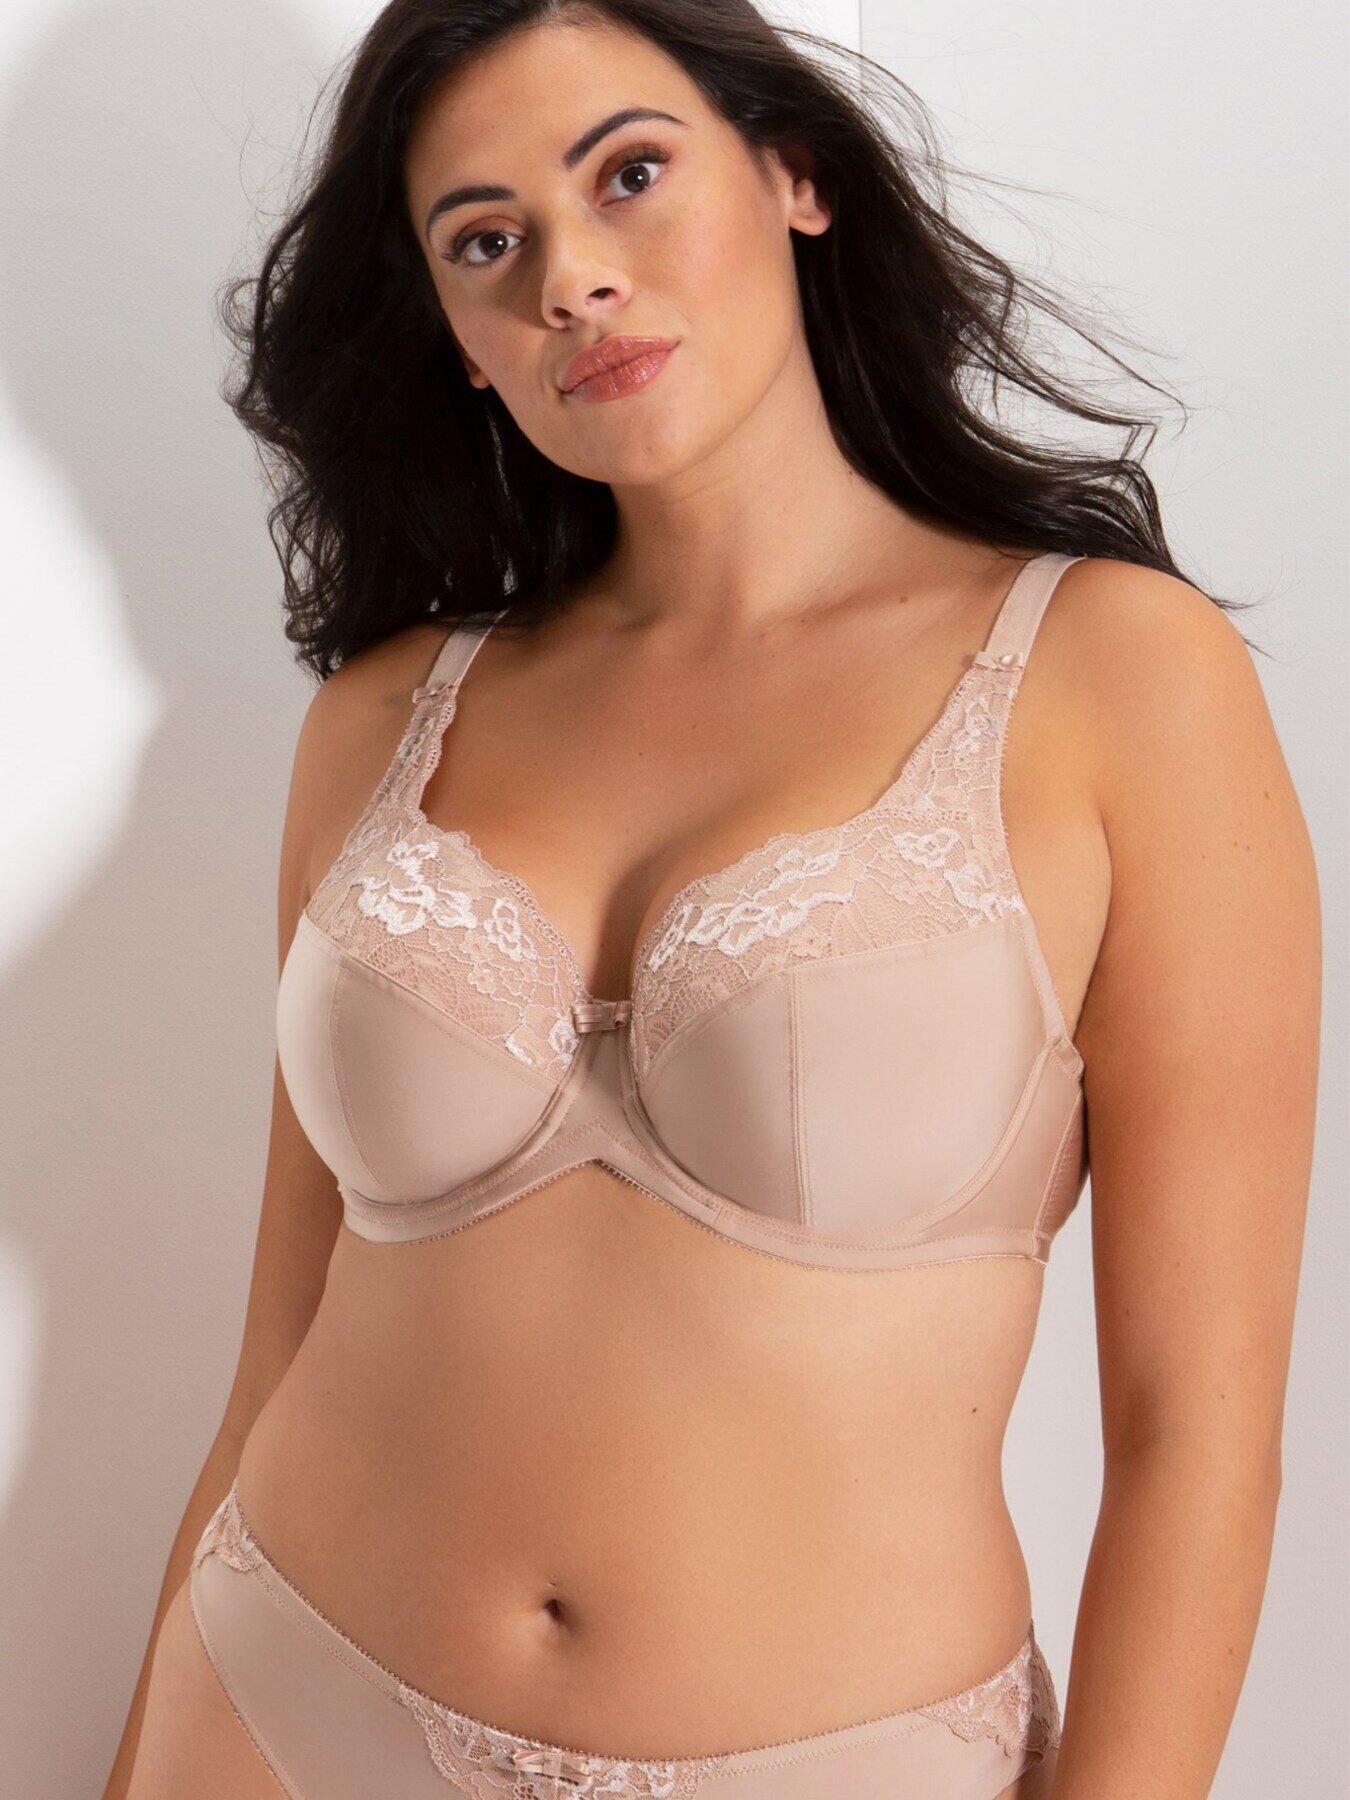 Ann Summers Sexy Lace Planet Fuller Bust Bra - White - Sizes 32-44